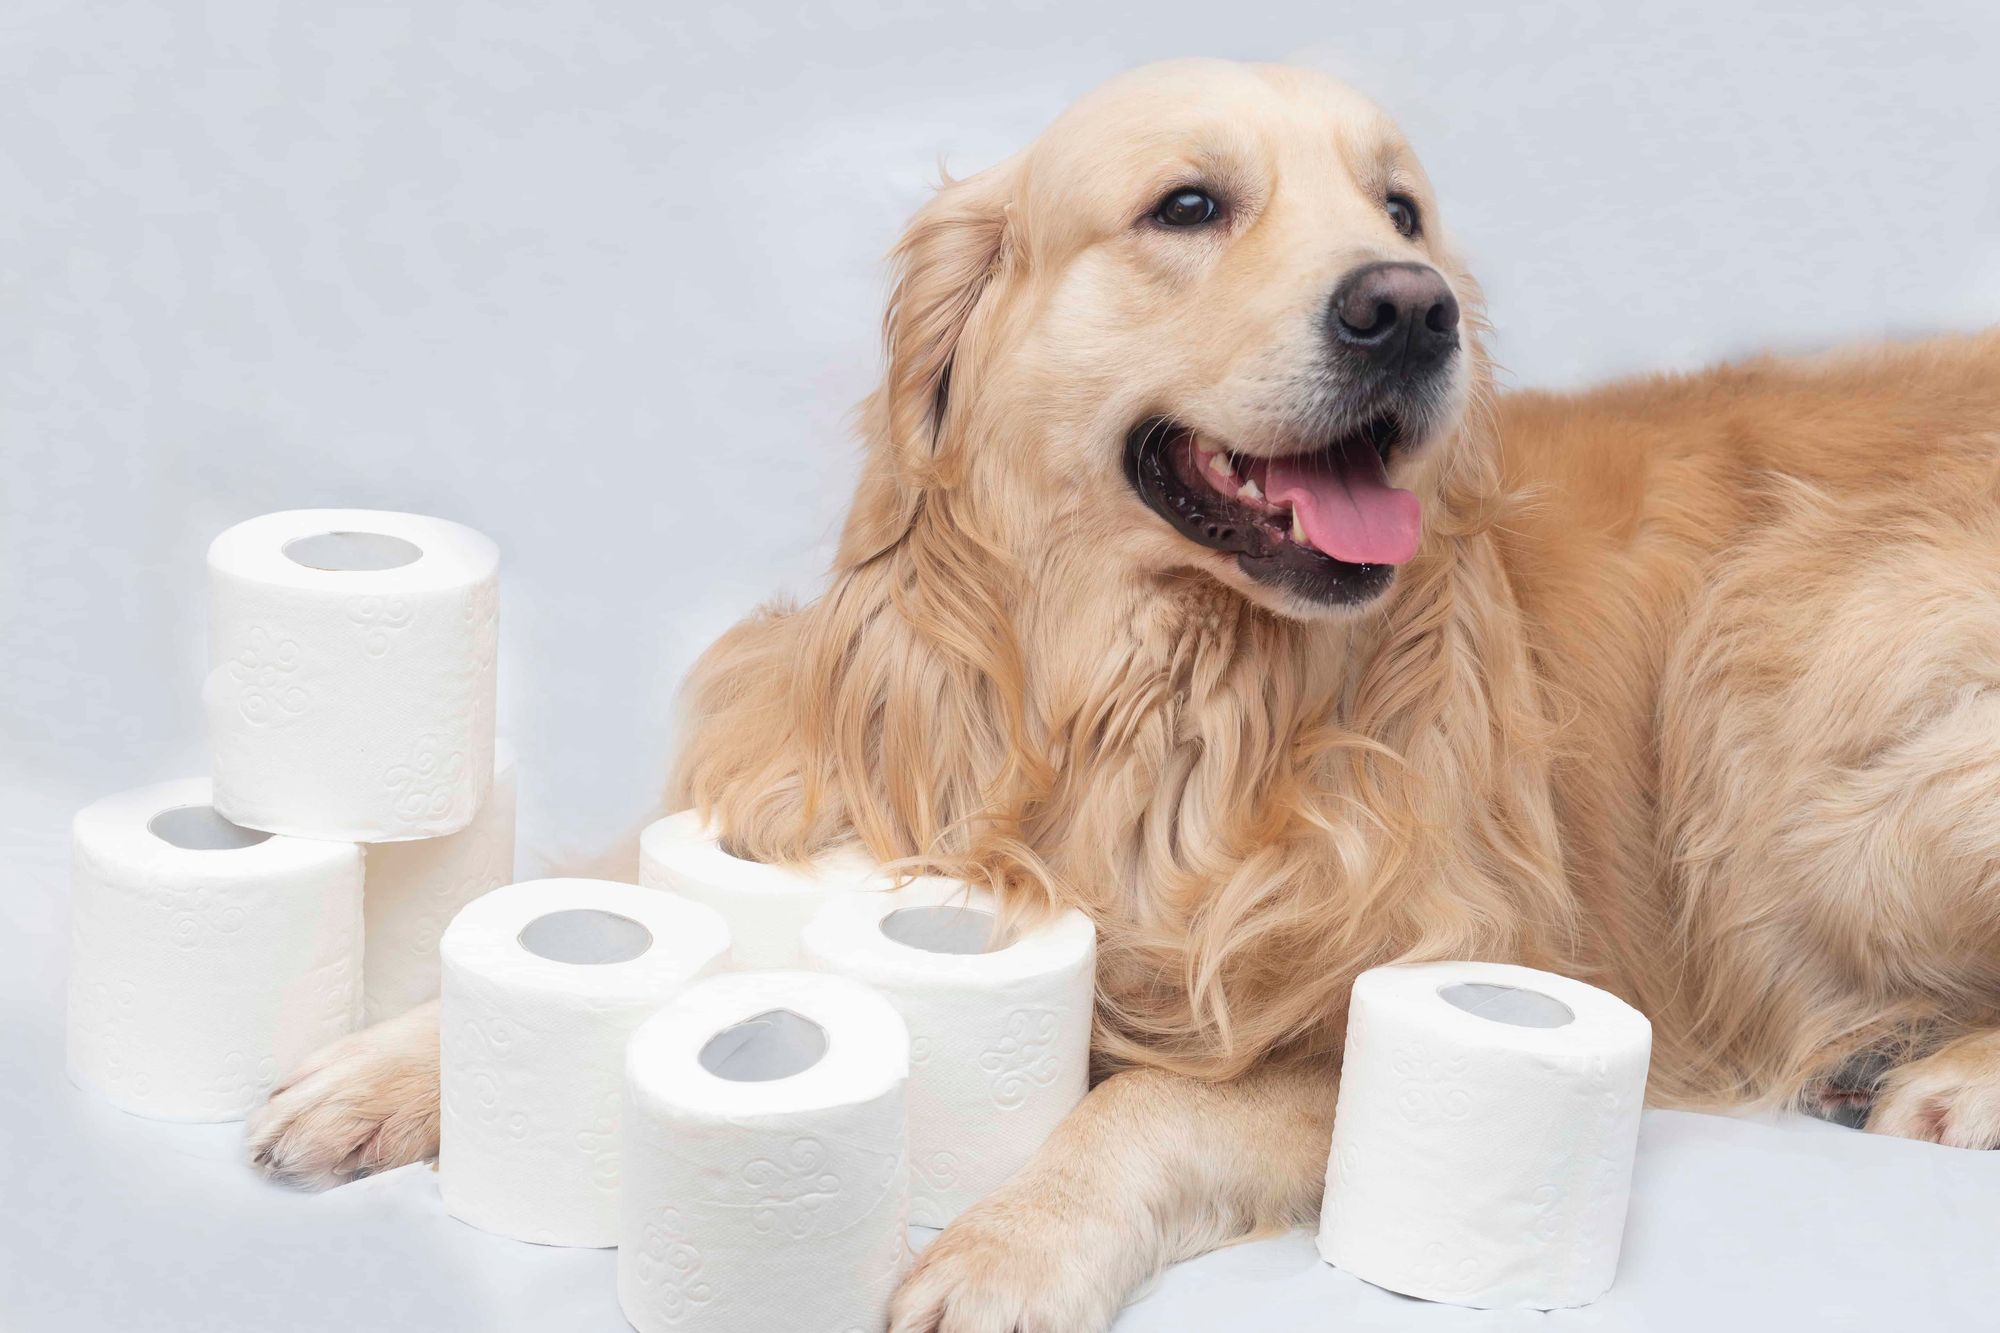 Dog sitting with toilet papers